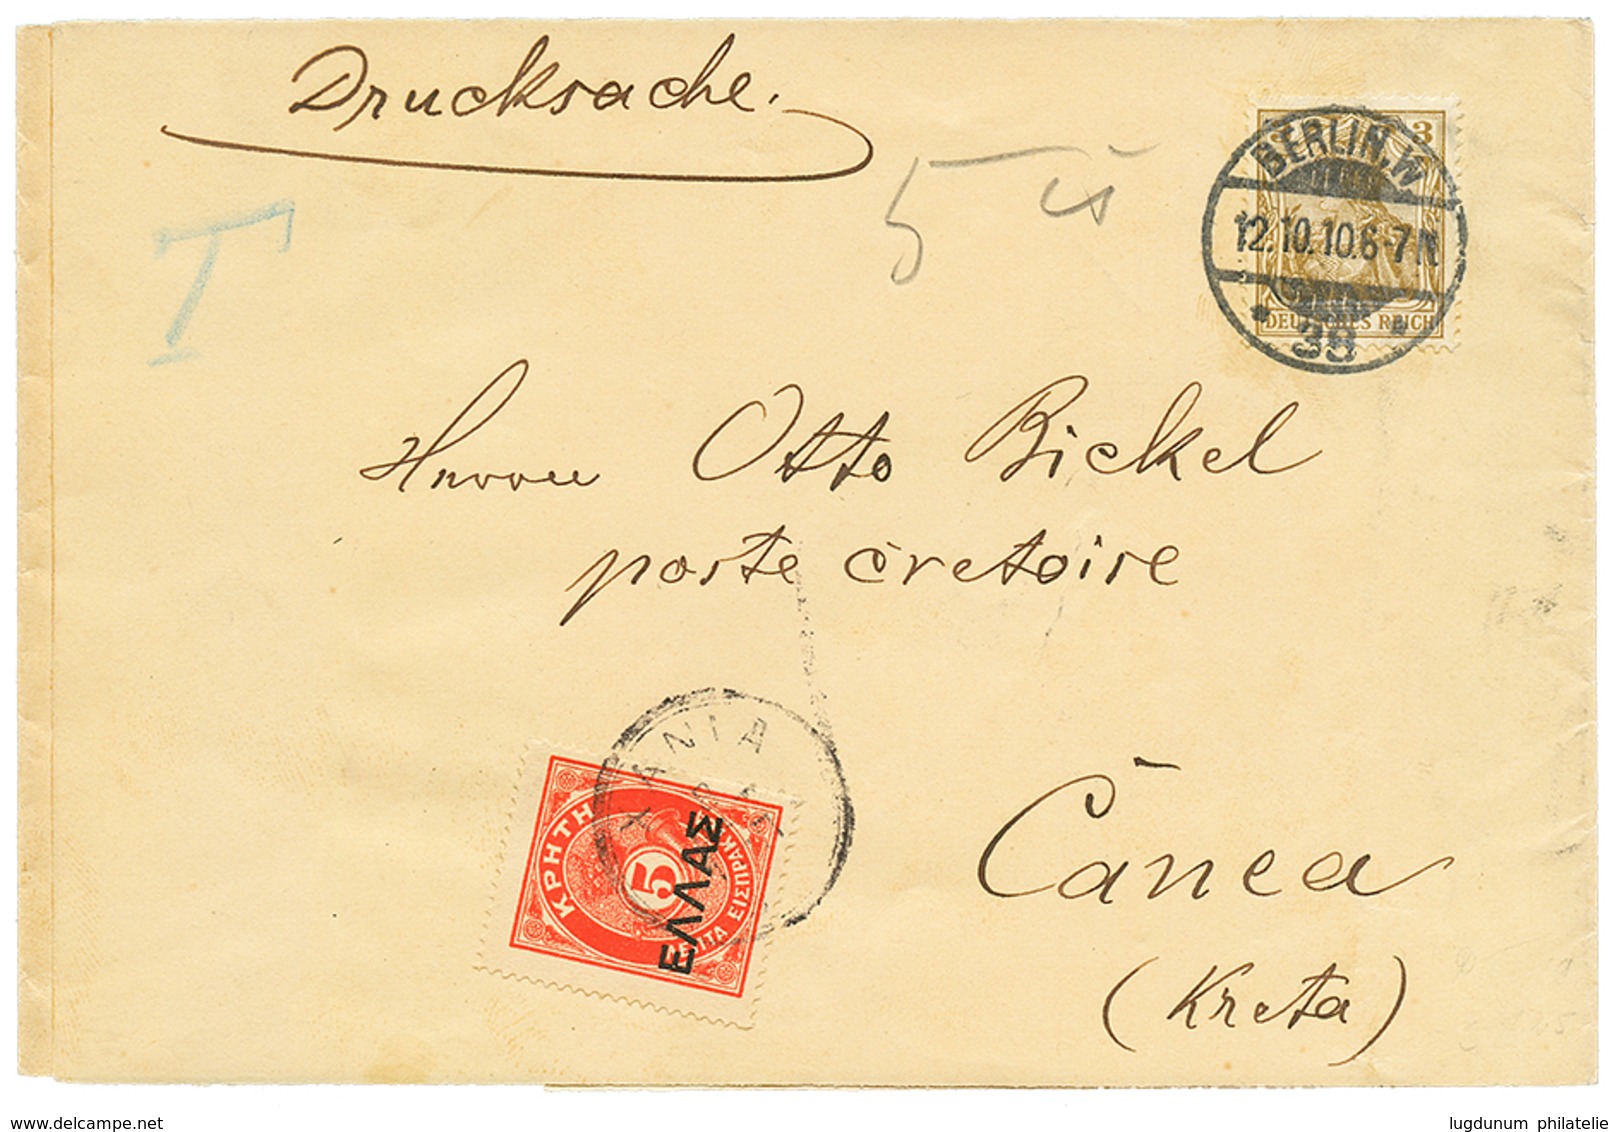 CANEA : 1910 GERMANIA 3pf Canc. BERLIN On Complete Wrapper (DRUCKSACHE) To CANEA Taxed On Arrival With CRETE 5l POSTAGE  - Eastern Austria